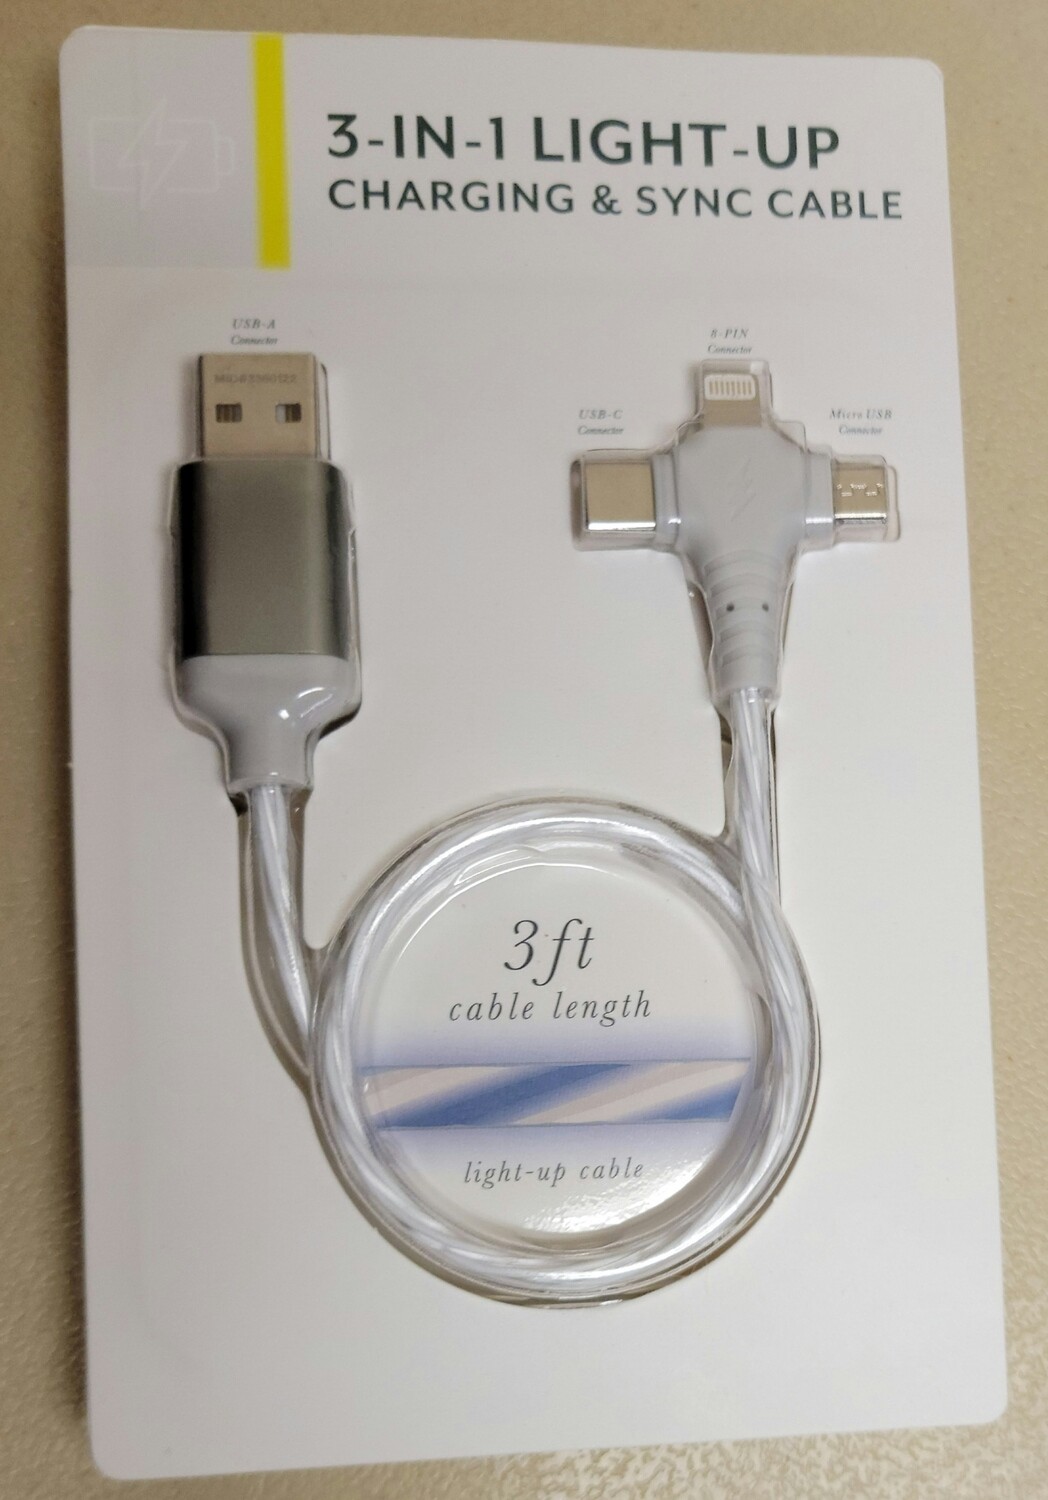 3-IN-1 Charge and Sync Cable